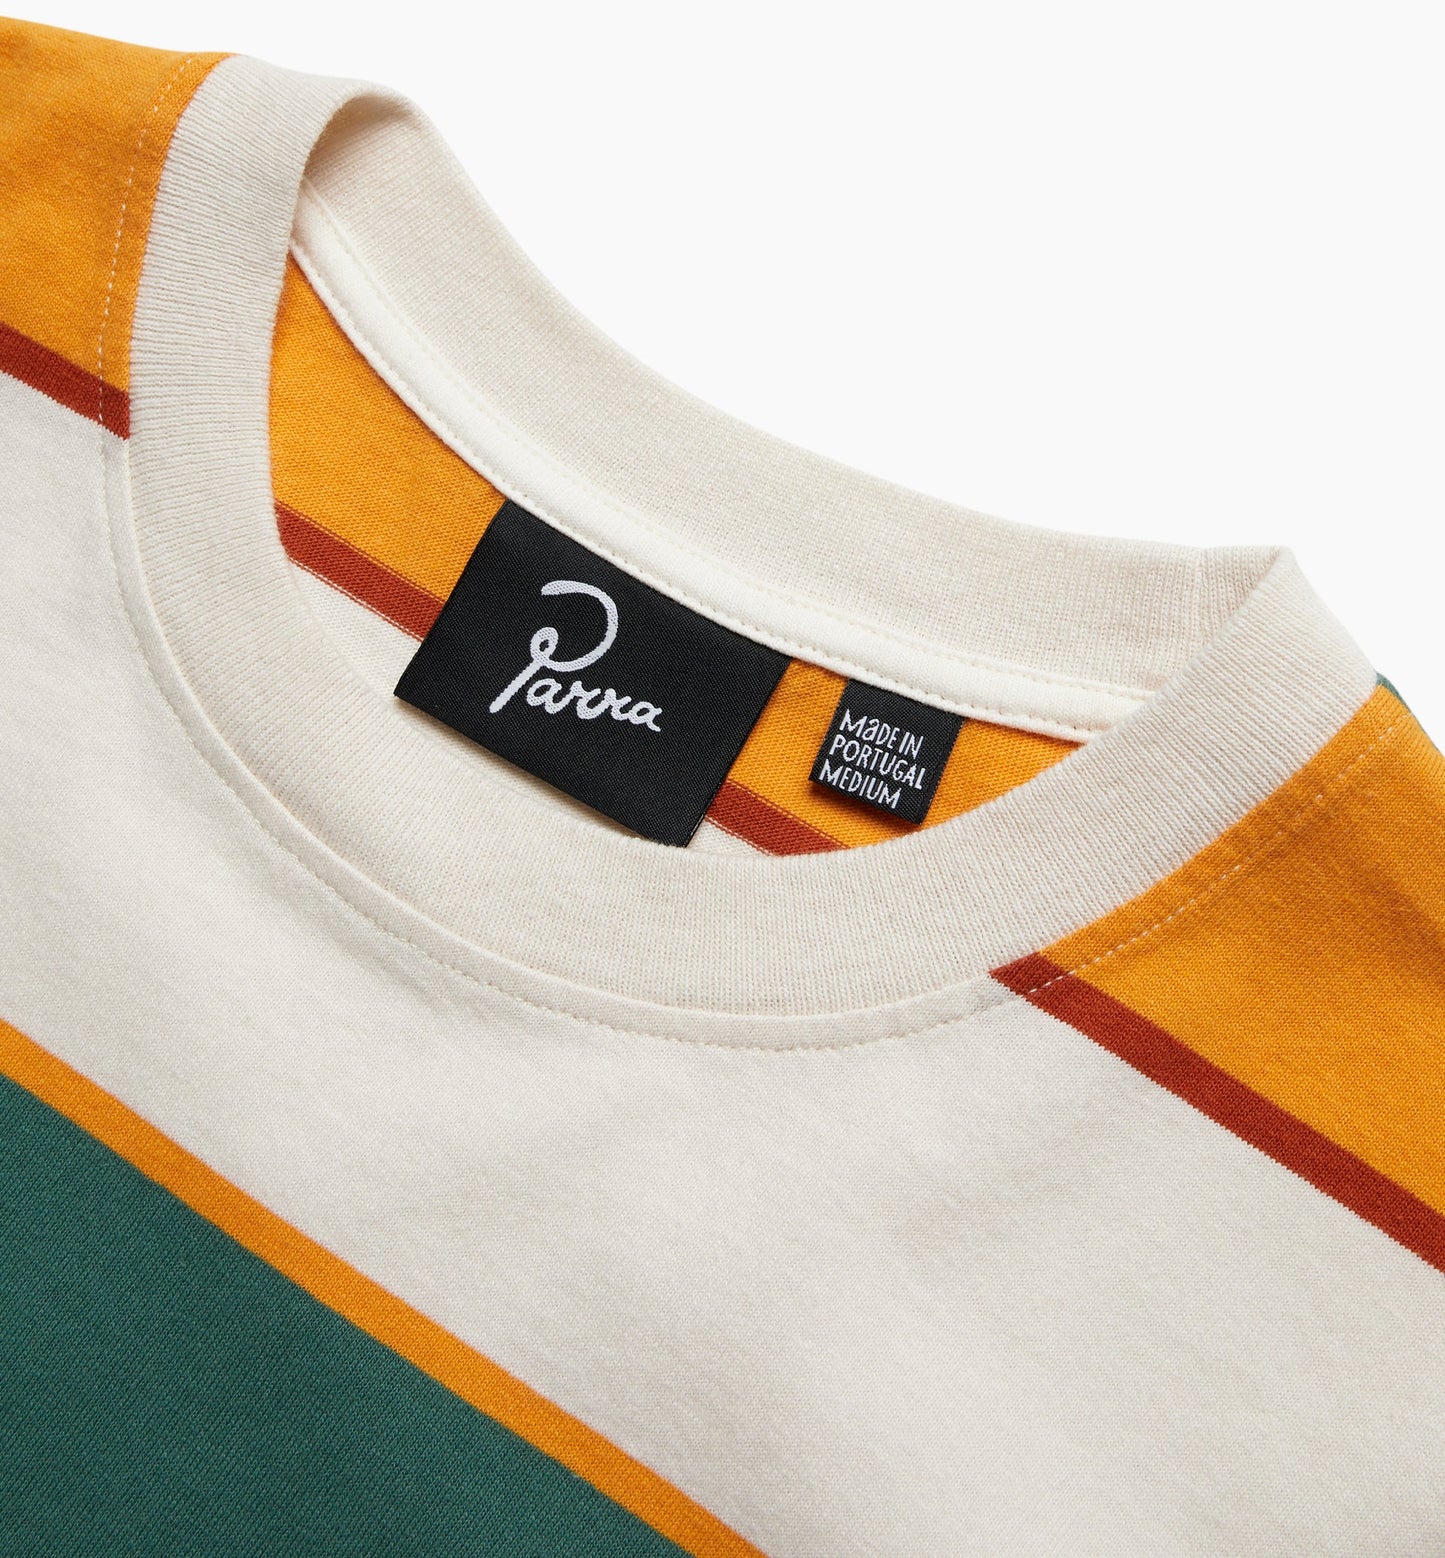 Parra "Fast Food Logo Striped Tee" M - Burned Yellow